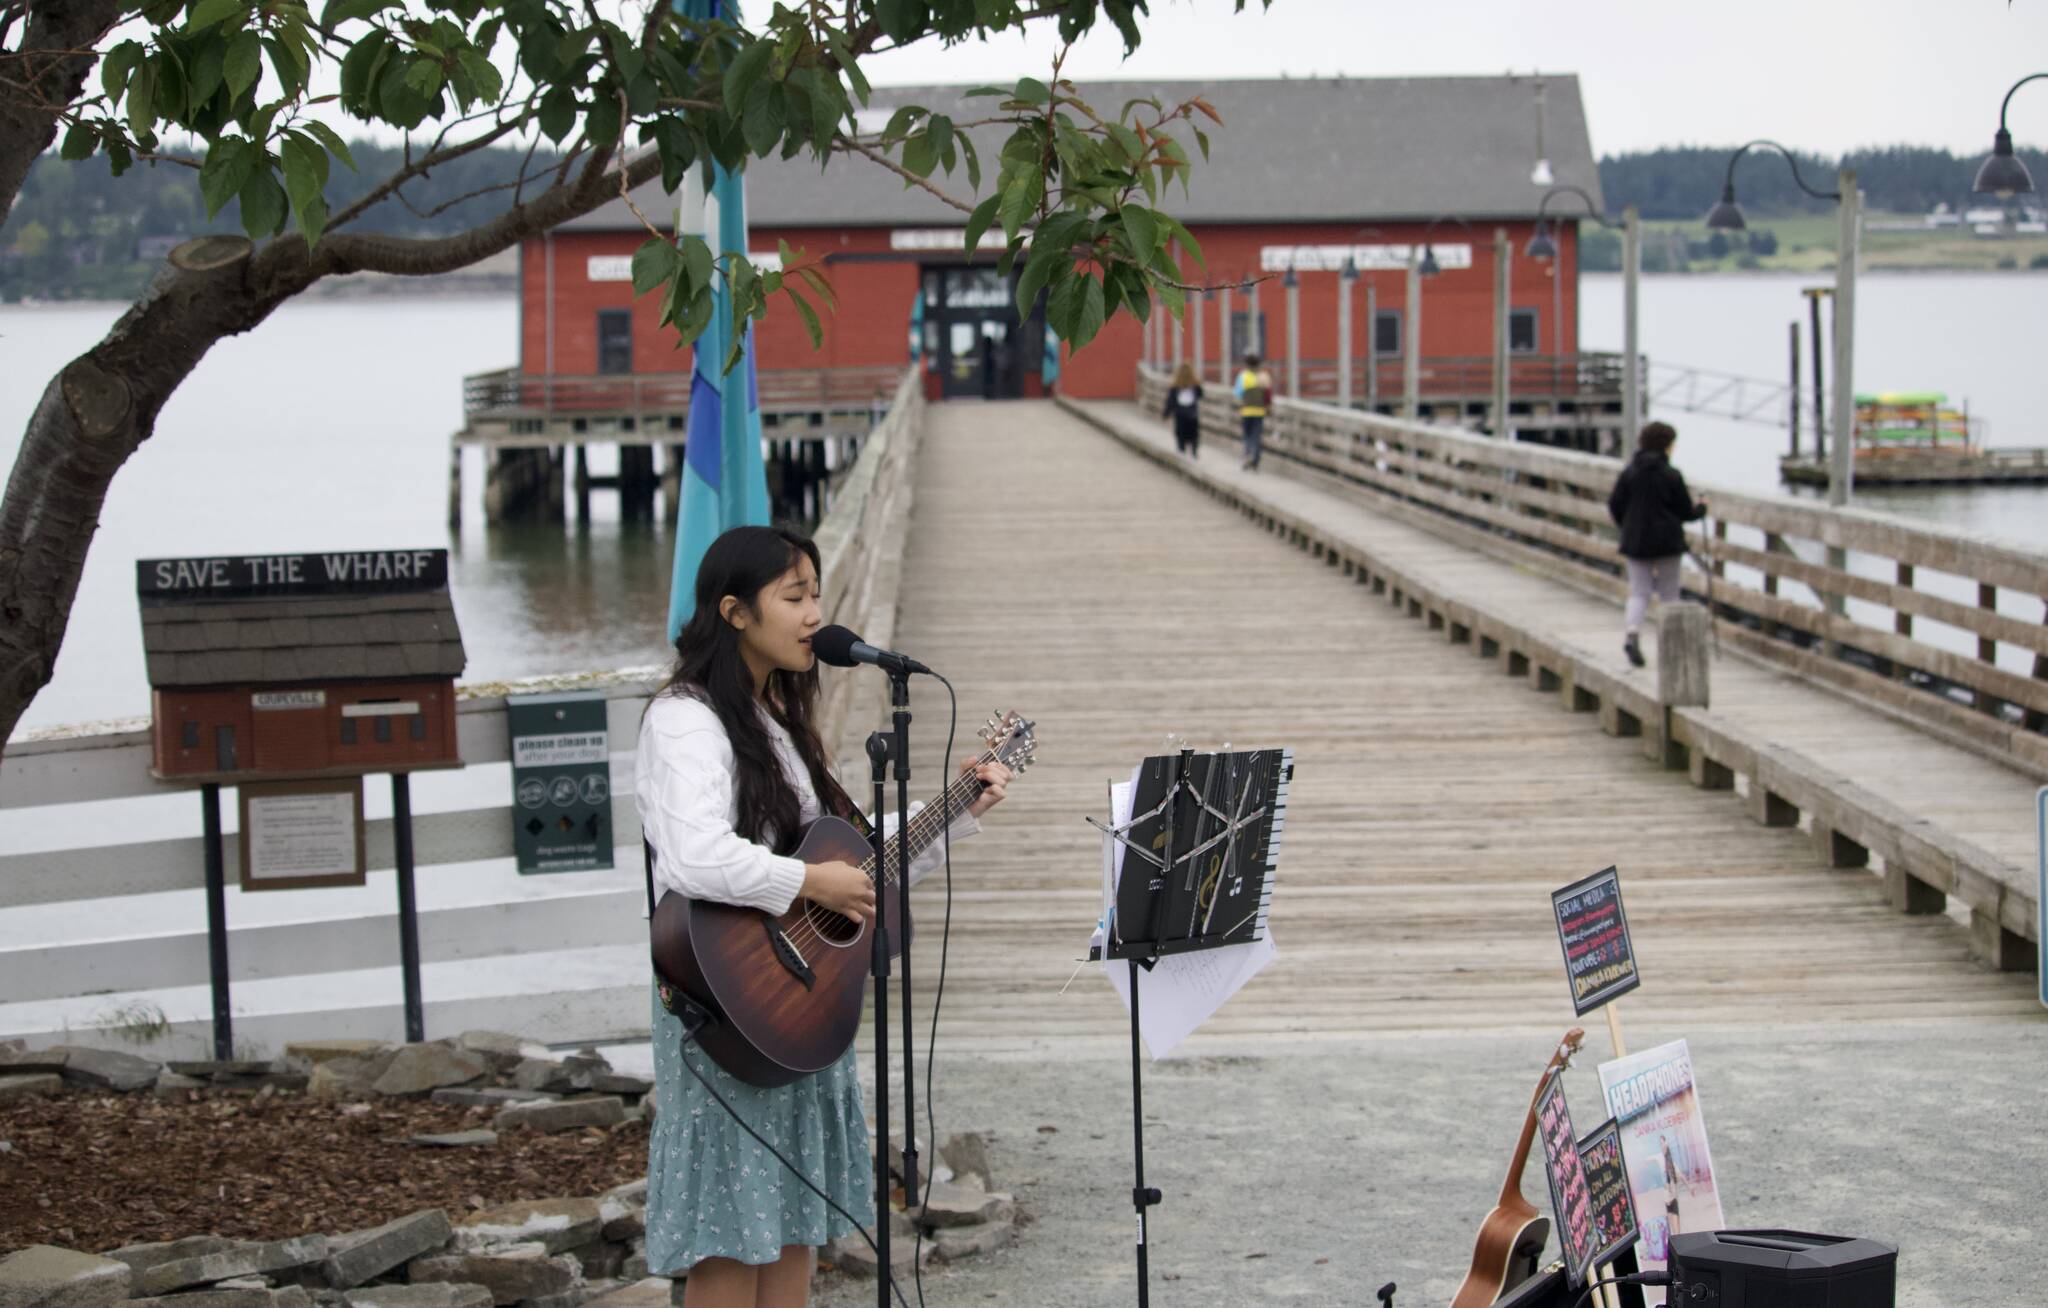 Danika Kloewer performs at Waterfront Wednesday. (Photo by Rachel Rosen/Whidbey News-Times)